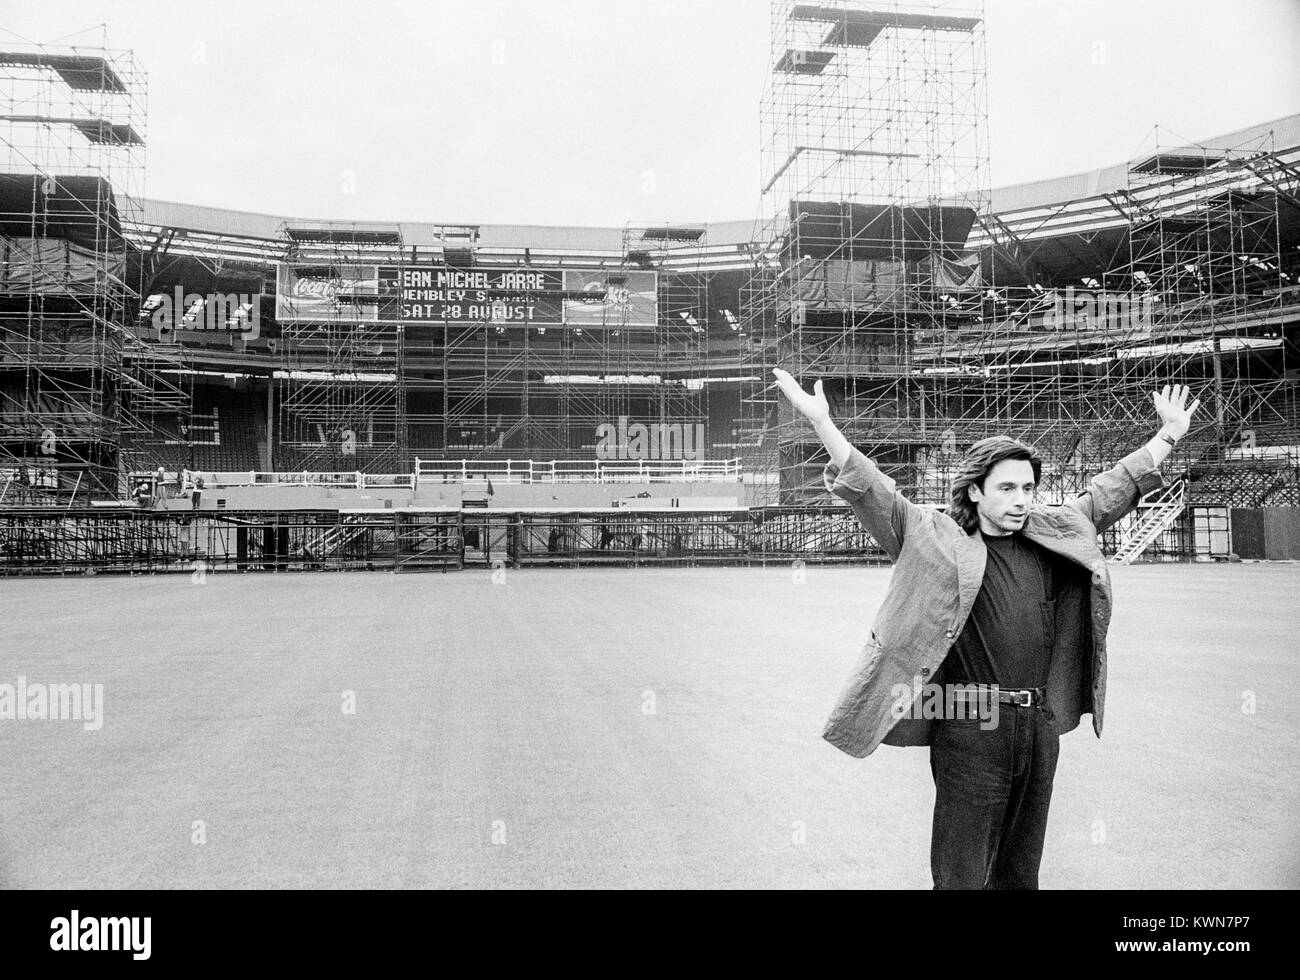 Jean Michel Jarre in front of the stage being erected by the Edwin Shirley Staging crew in Wembley Stadium for the Jean Michel Jarre concert tour, Europe in Concert, London, 26 - 28th August 1993 Stock Photo